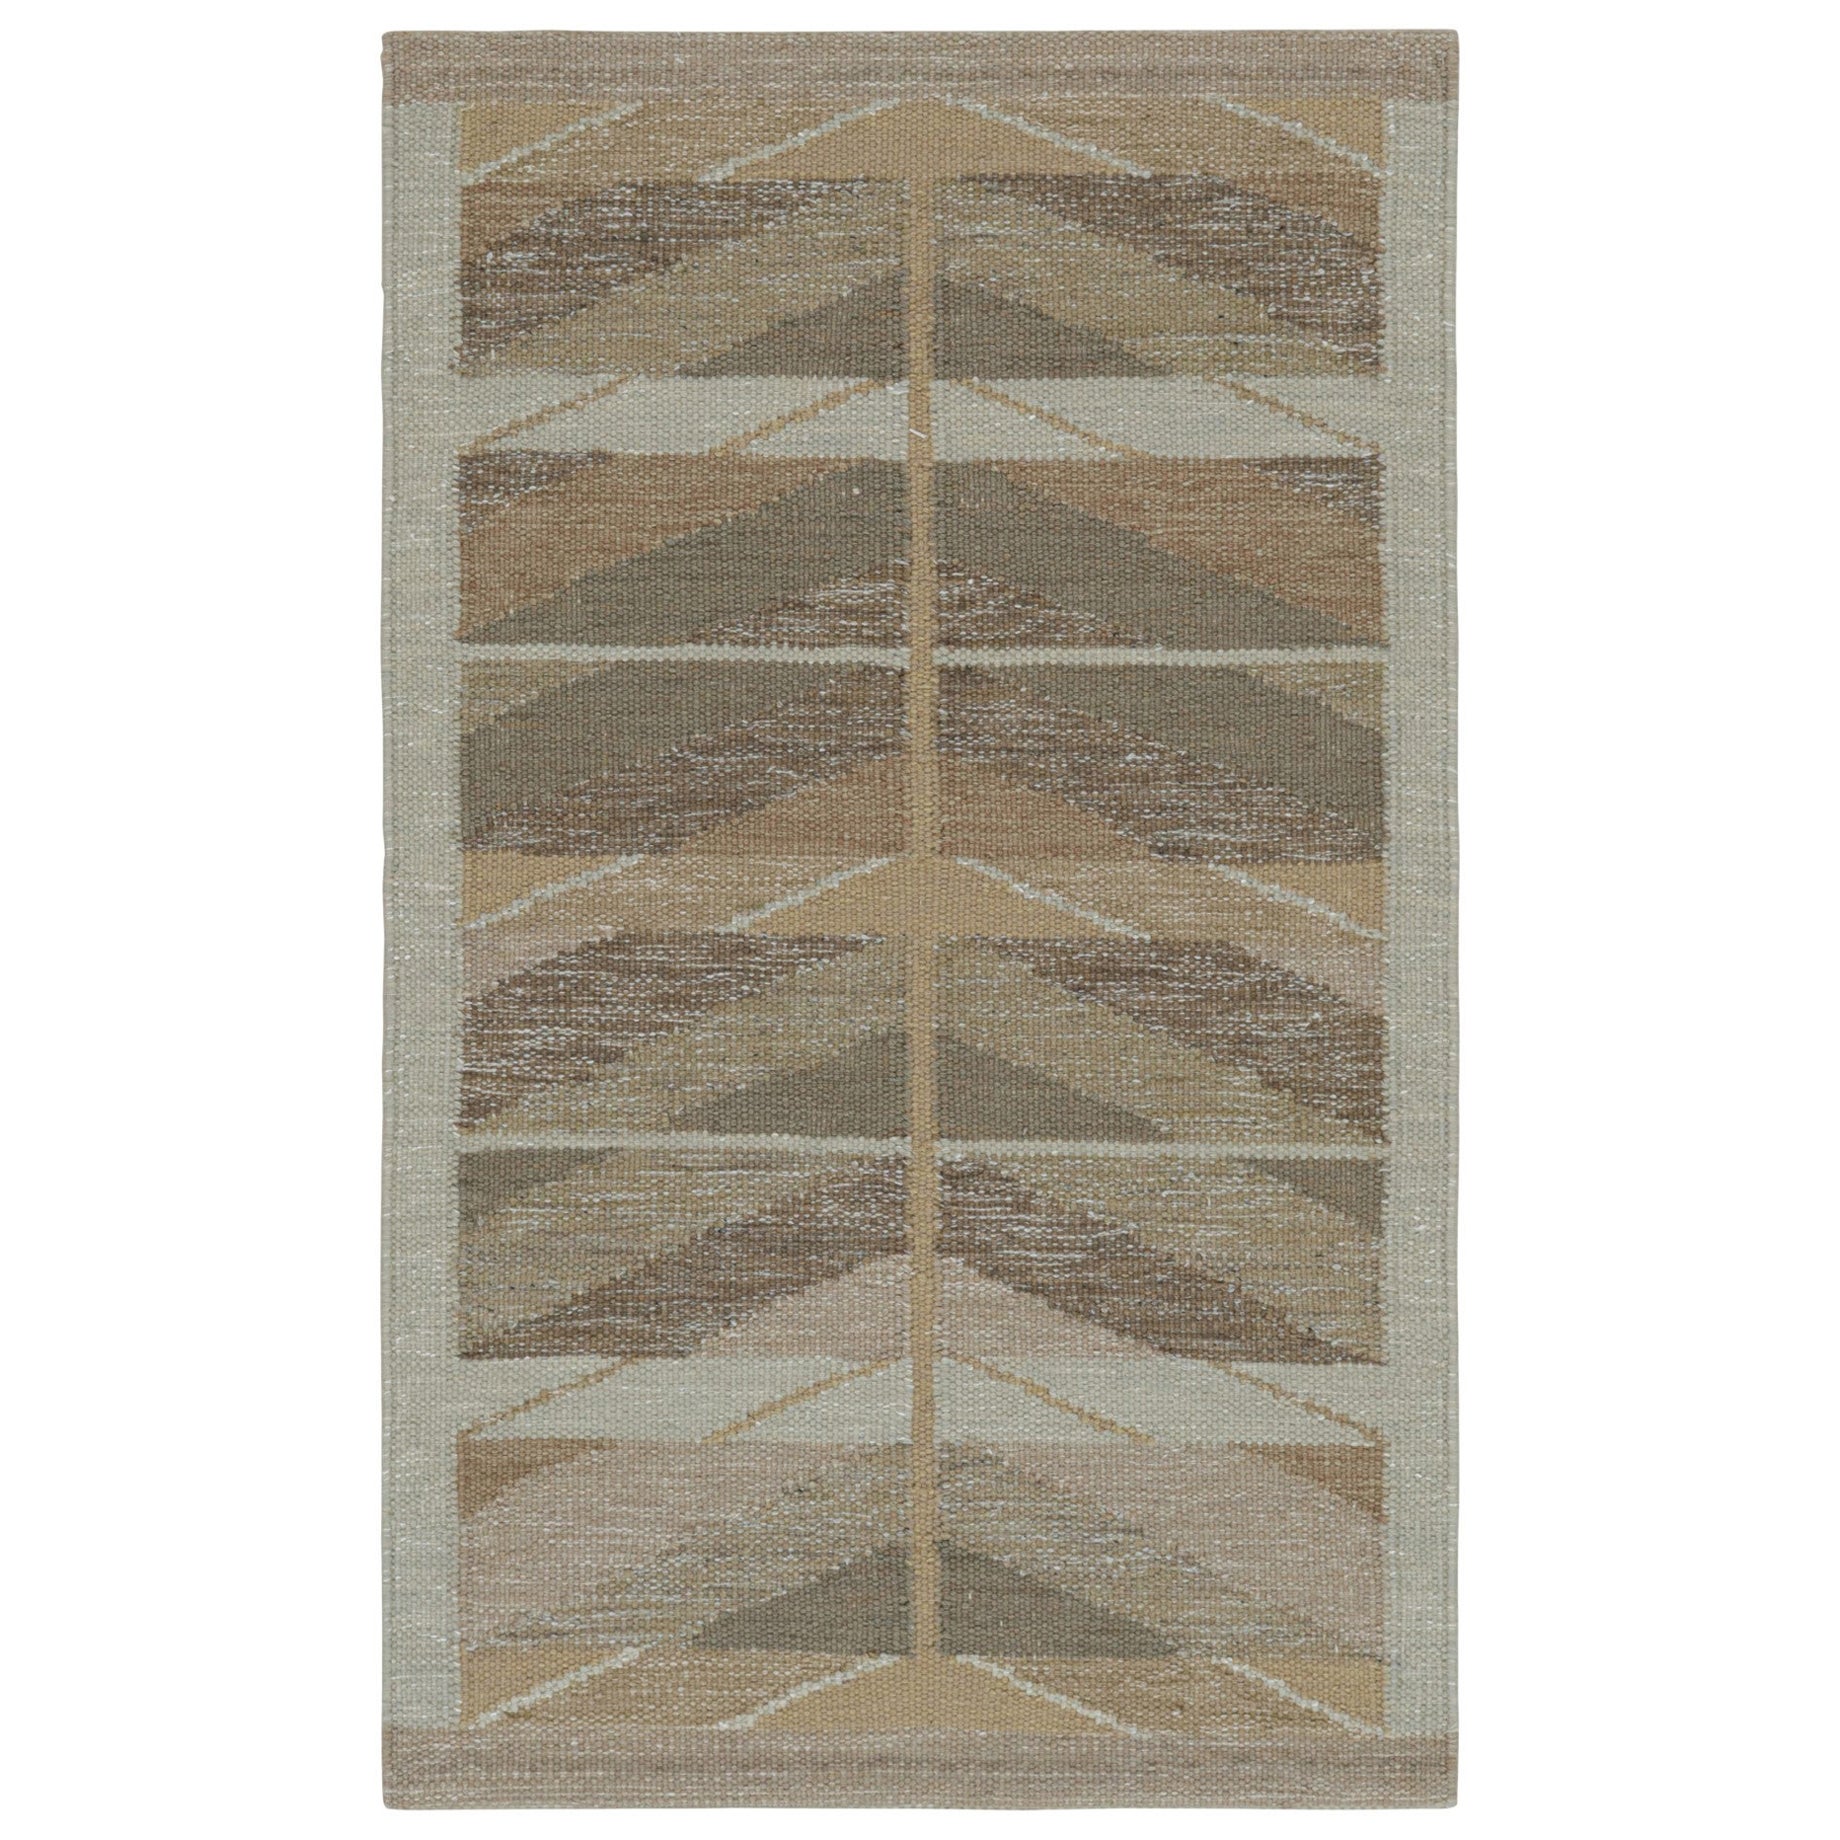 Rug & Kilim’s Scandinavian Kilim and Scatter Rug with Geometric Patterns